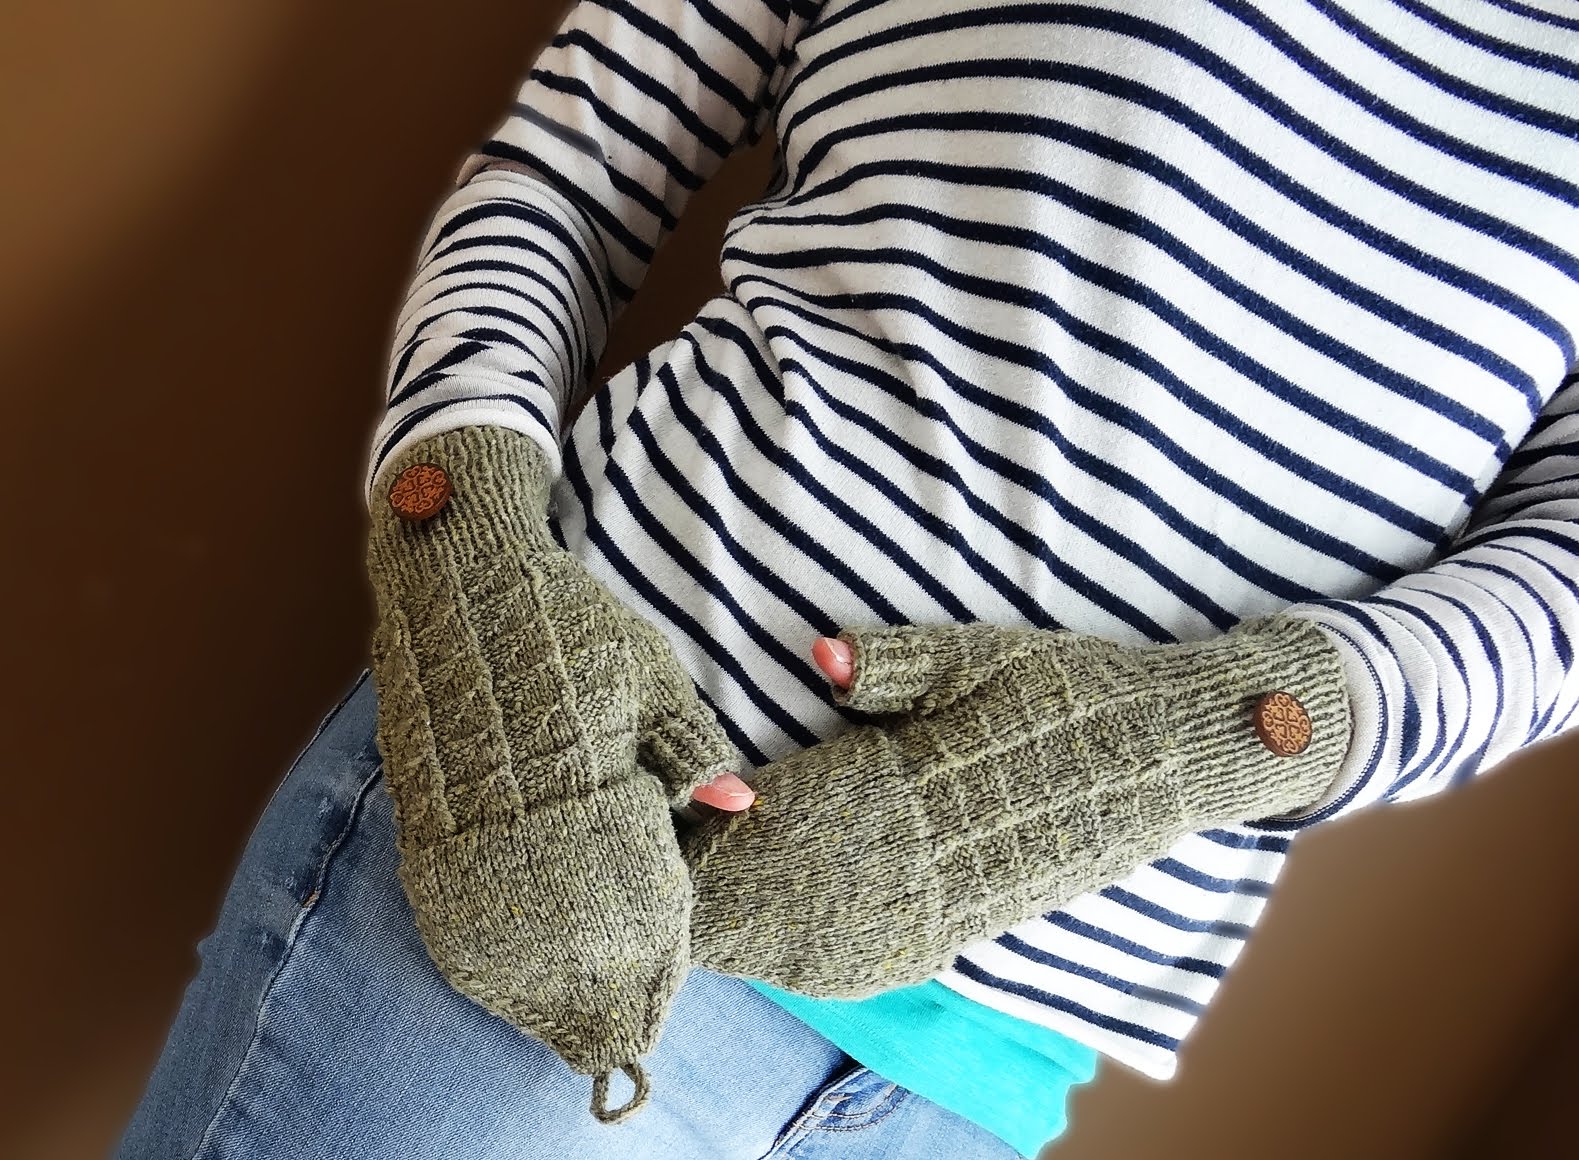 Mr. Cratchit's Convertible Mitts